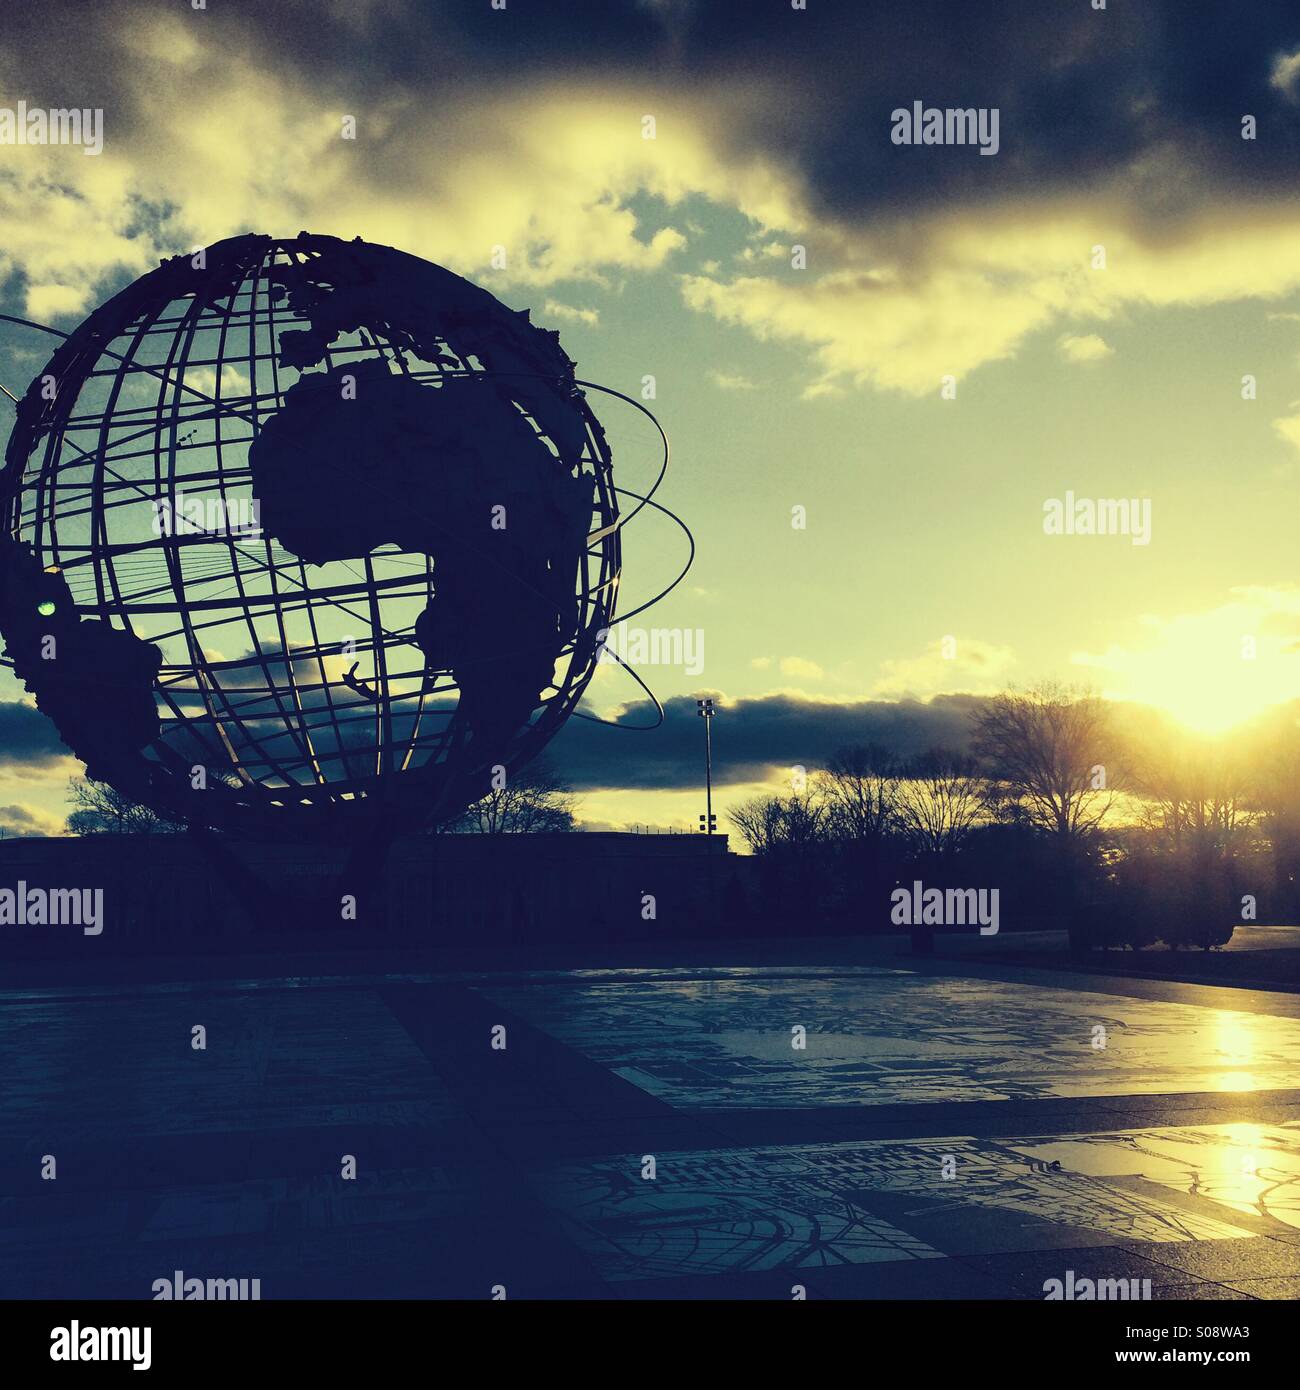 The Unisphere in Flushing Meadows Park in Queens, NY Stock Photo